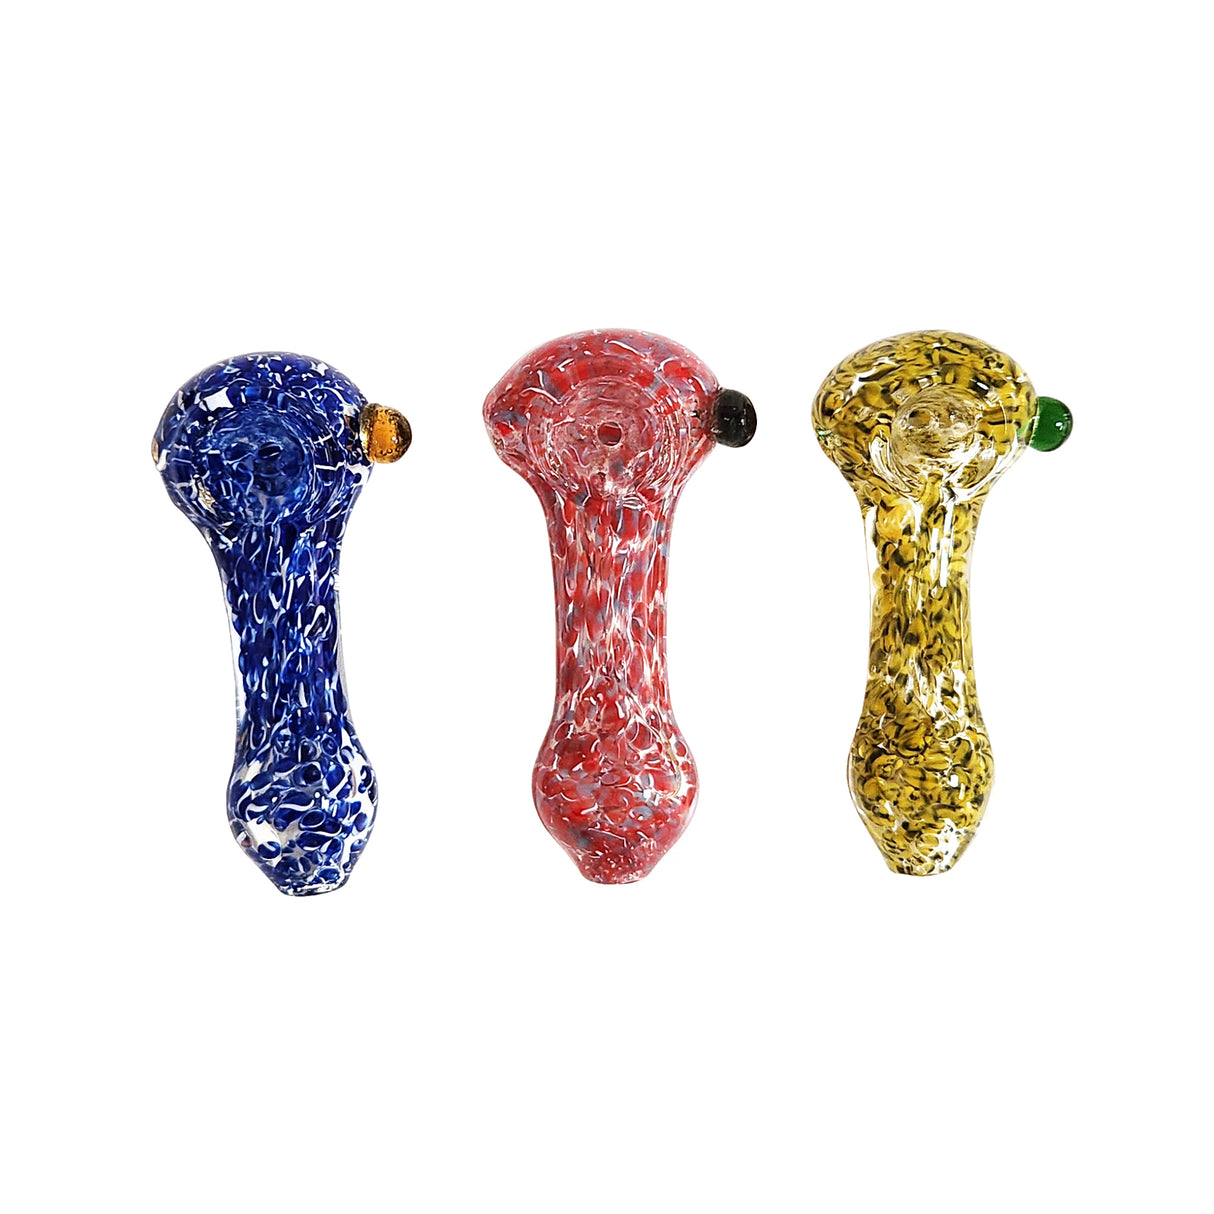 Glass Spoon Pipe w/ Inside-Out Mixed Fruit Art